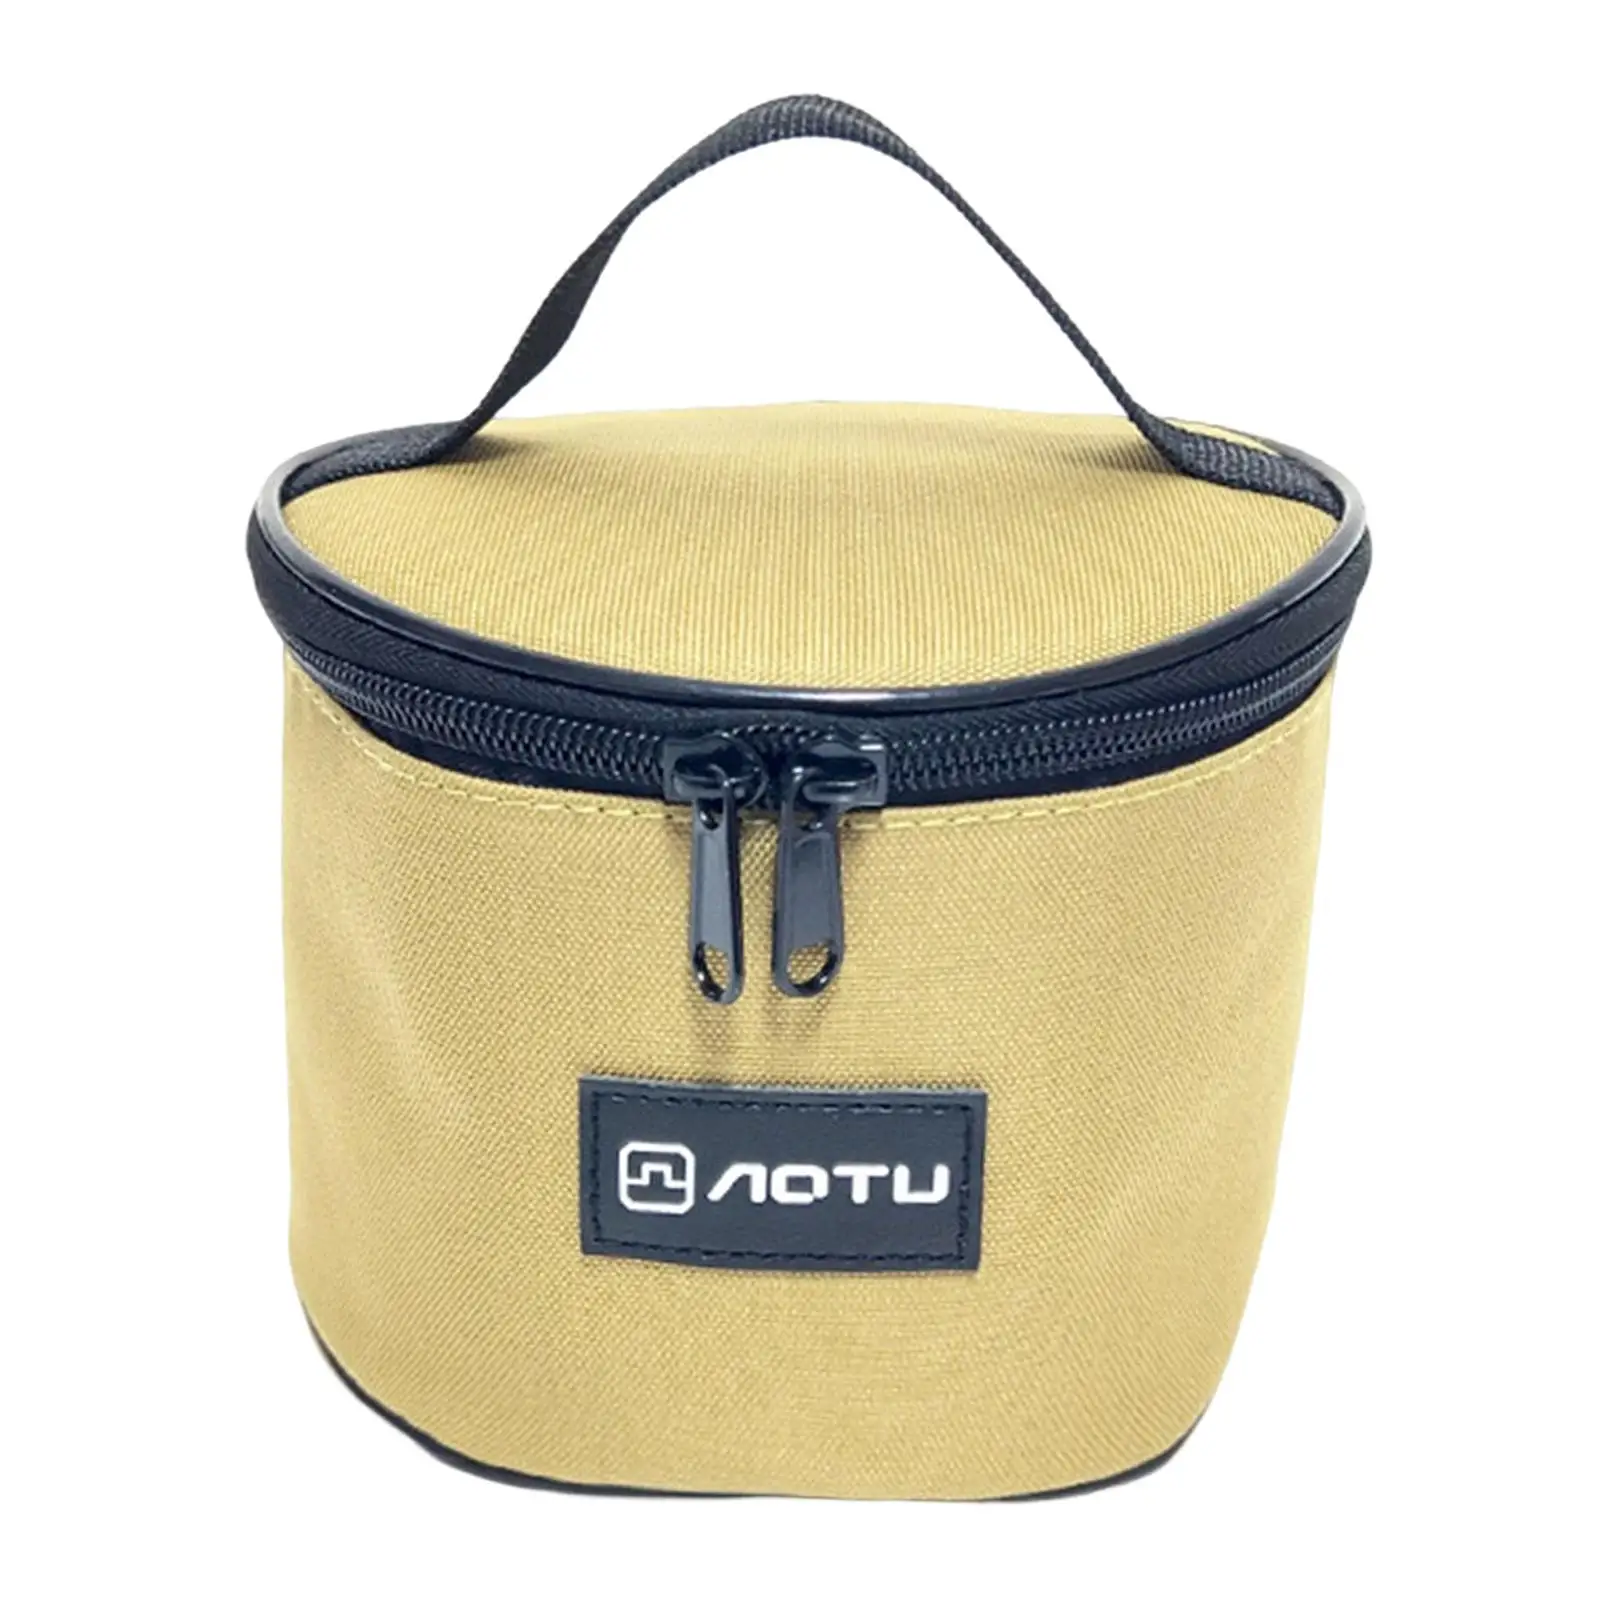 Camping Bowl Storage Bag Carry Case Hiking Organizer Waterproof Tableware Activities Outdoor Pouch for Picnic Dinnerware Cutlery